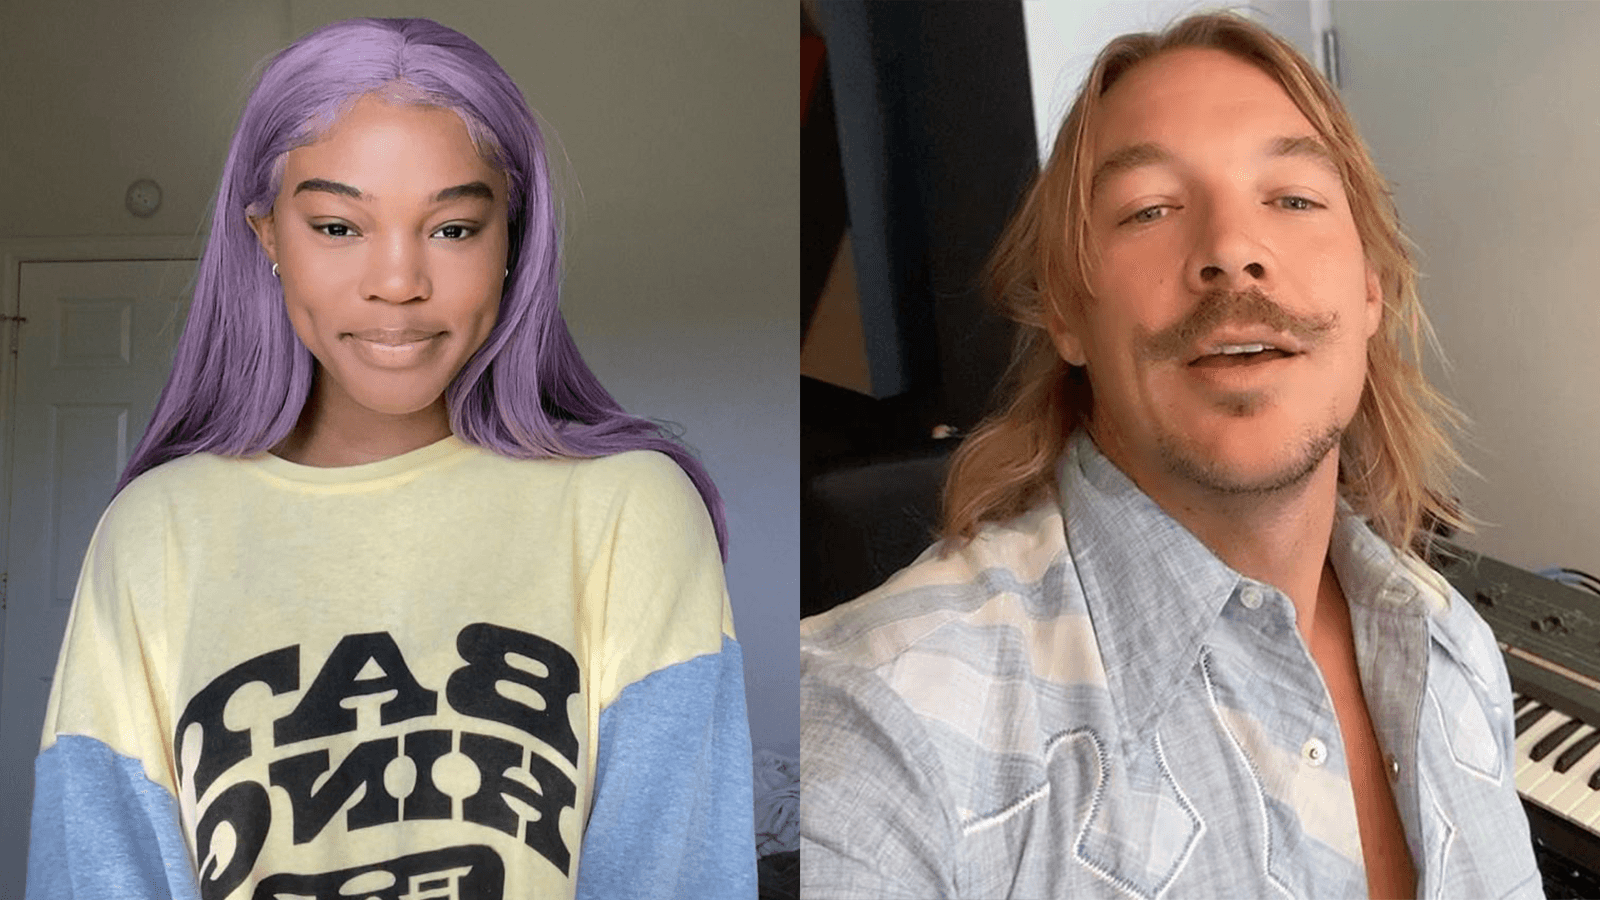 Quenlin Blackwell, Diplo DJ living together